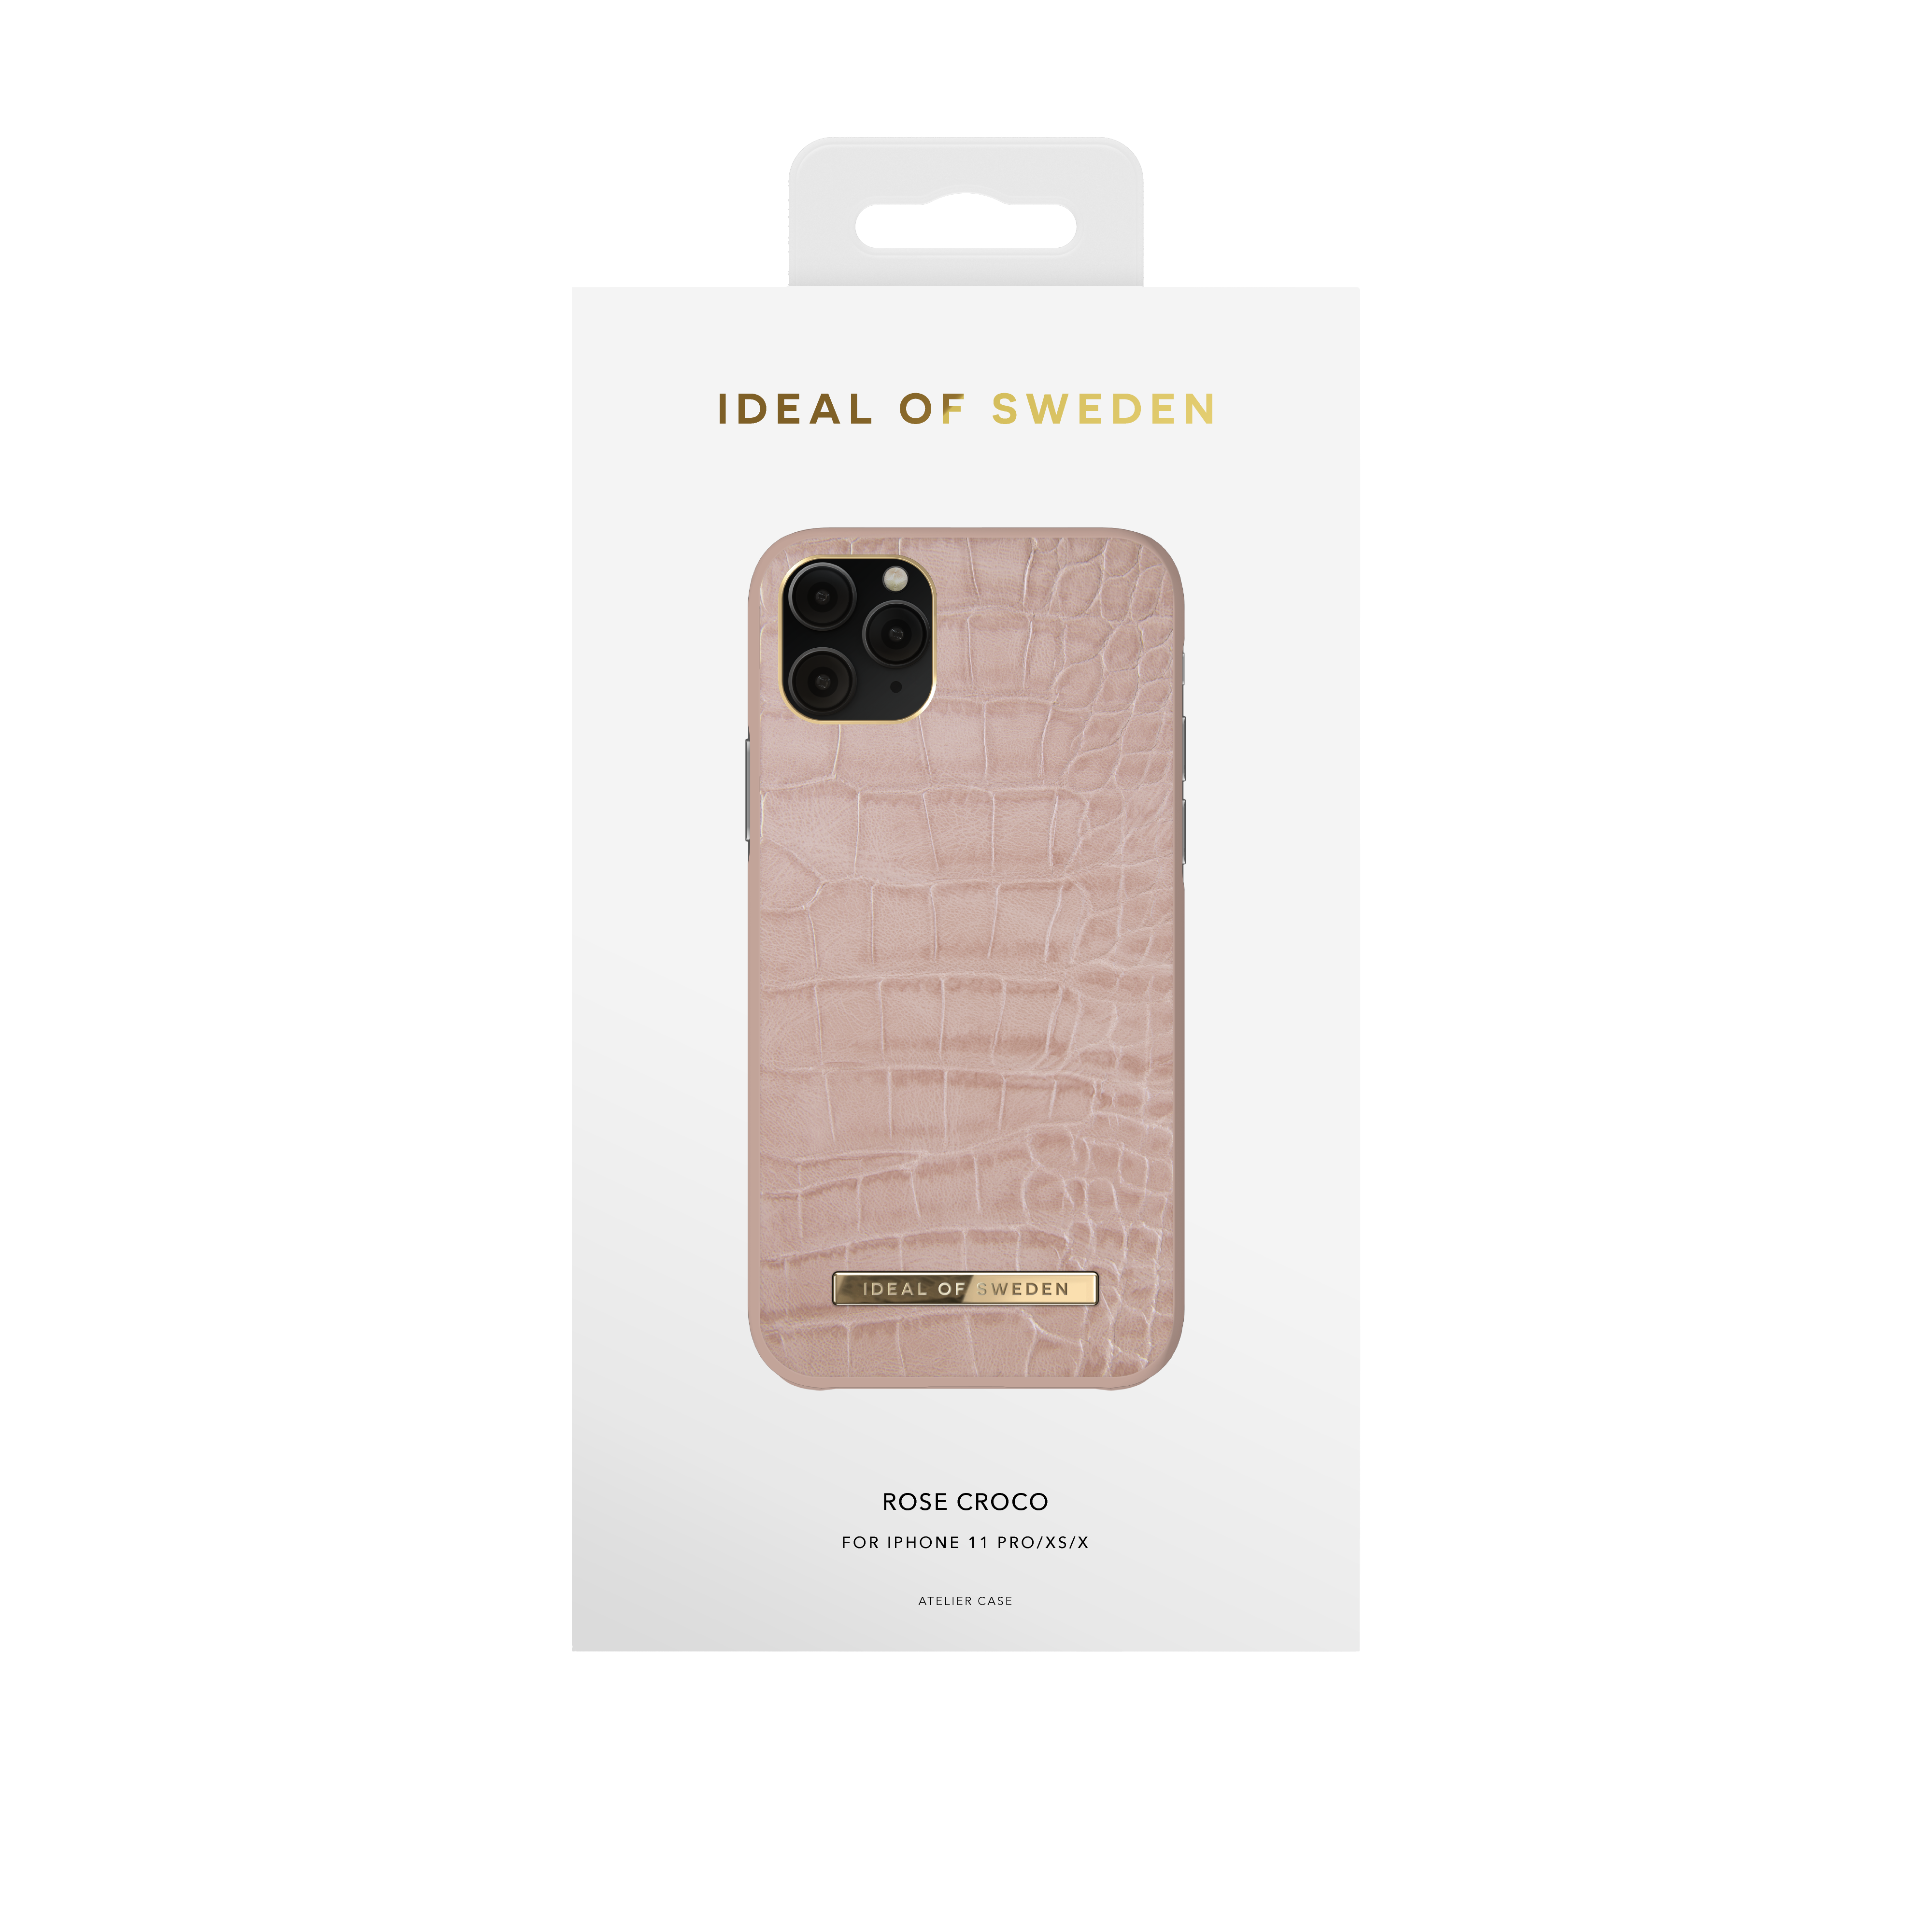 Croco X, IDACSS21-I1958-273, SWEDEN iPhone OF Backcover, iPhone IDEAL iPhone XS, Rose 11 Apple, Pro,